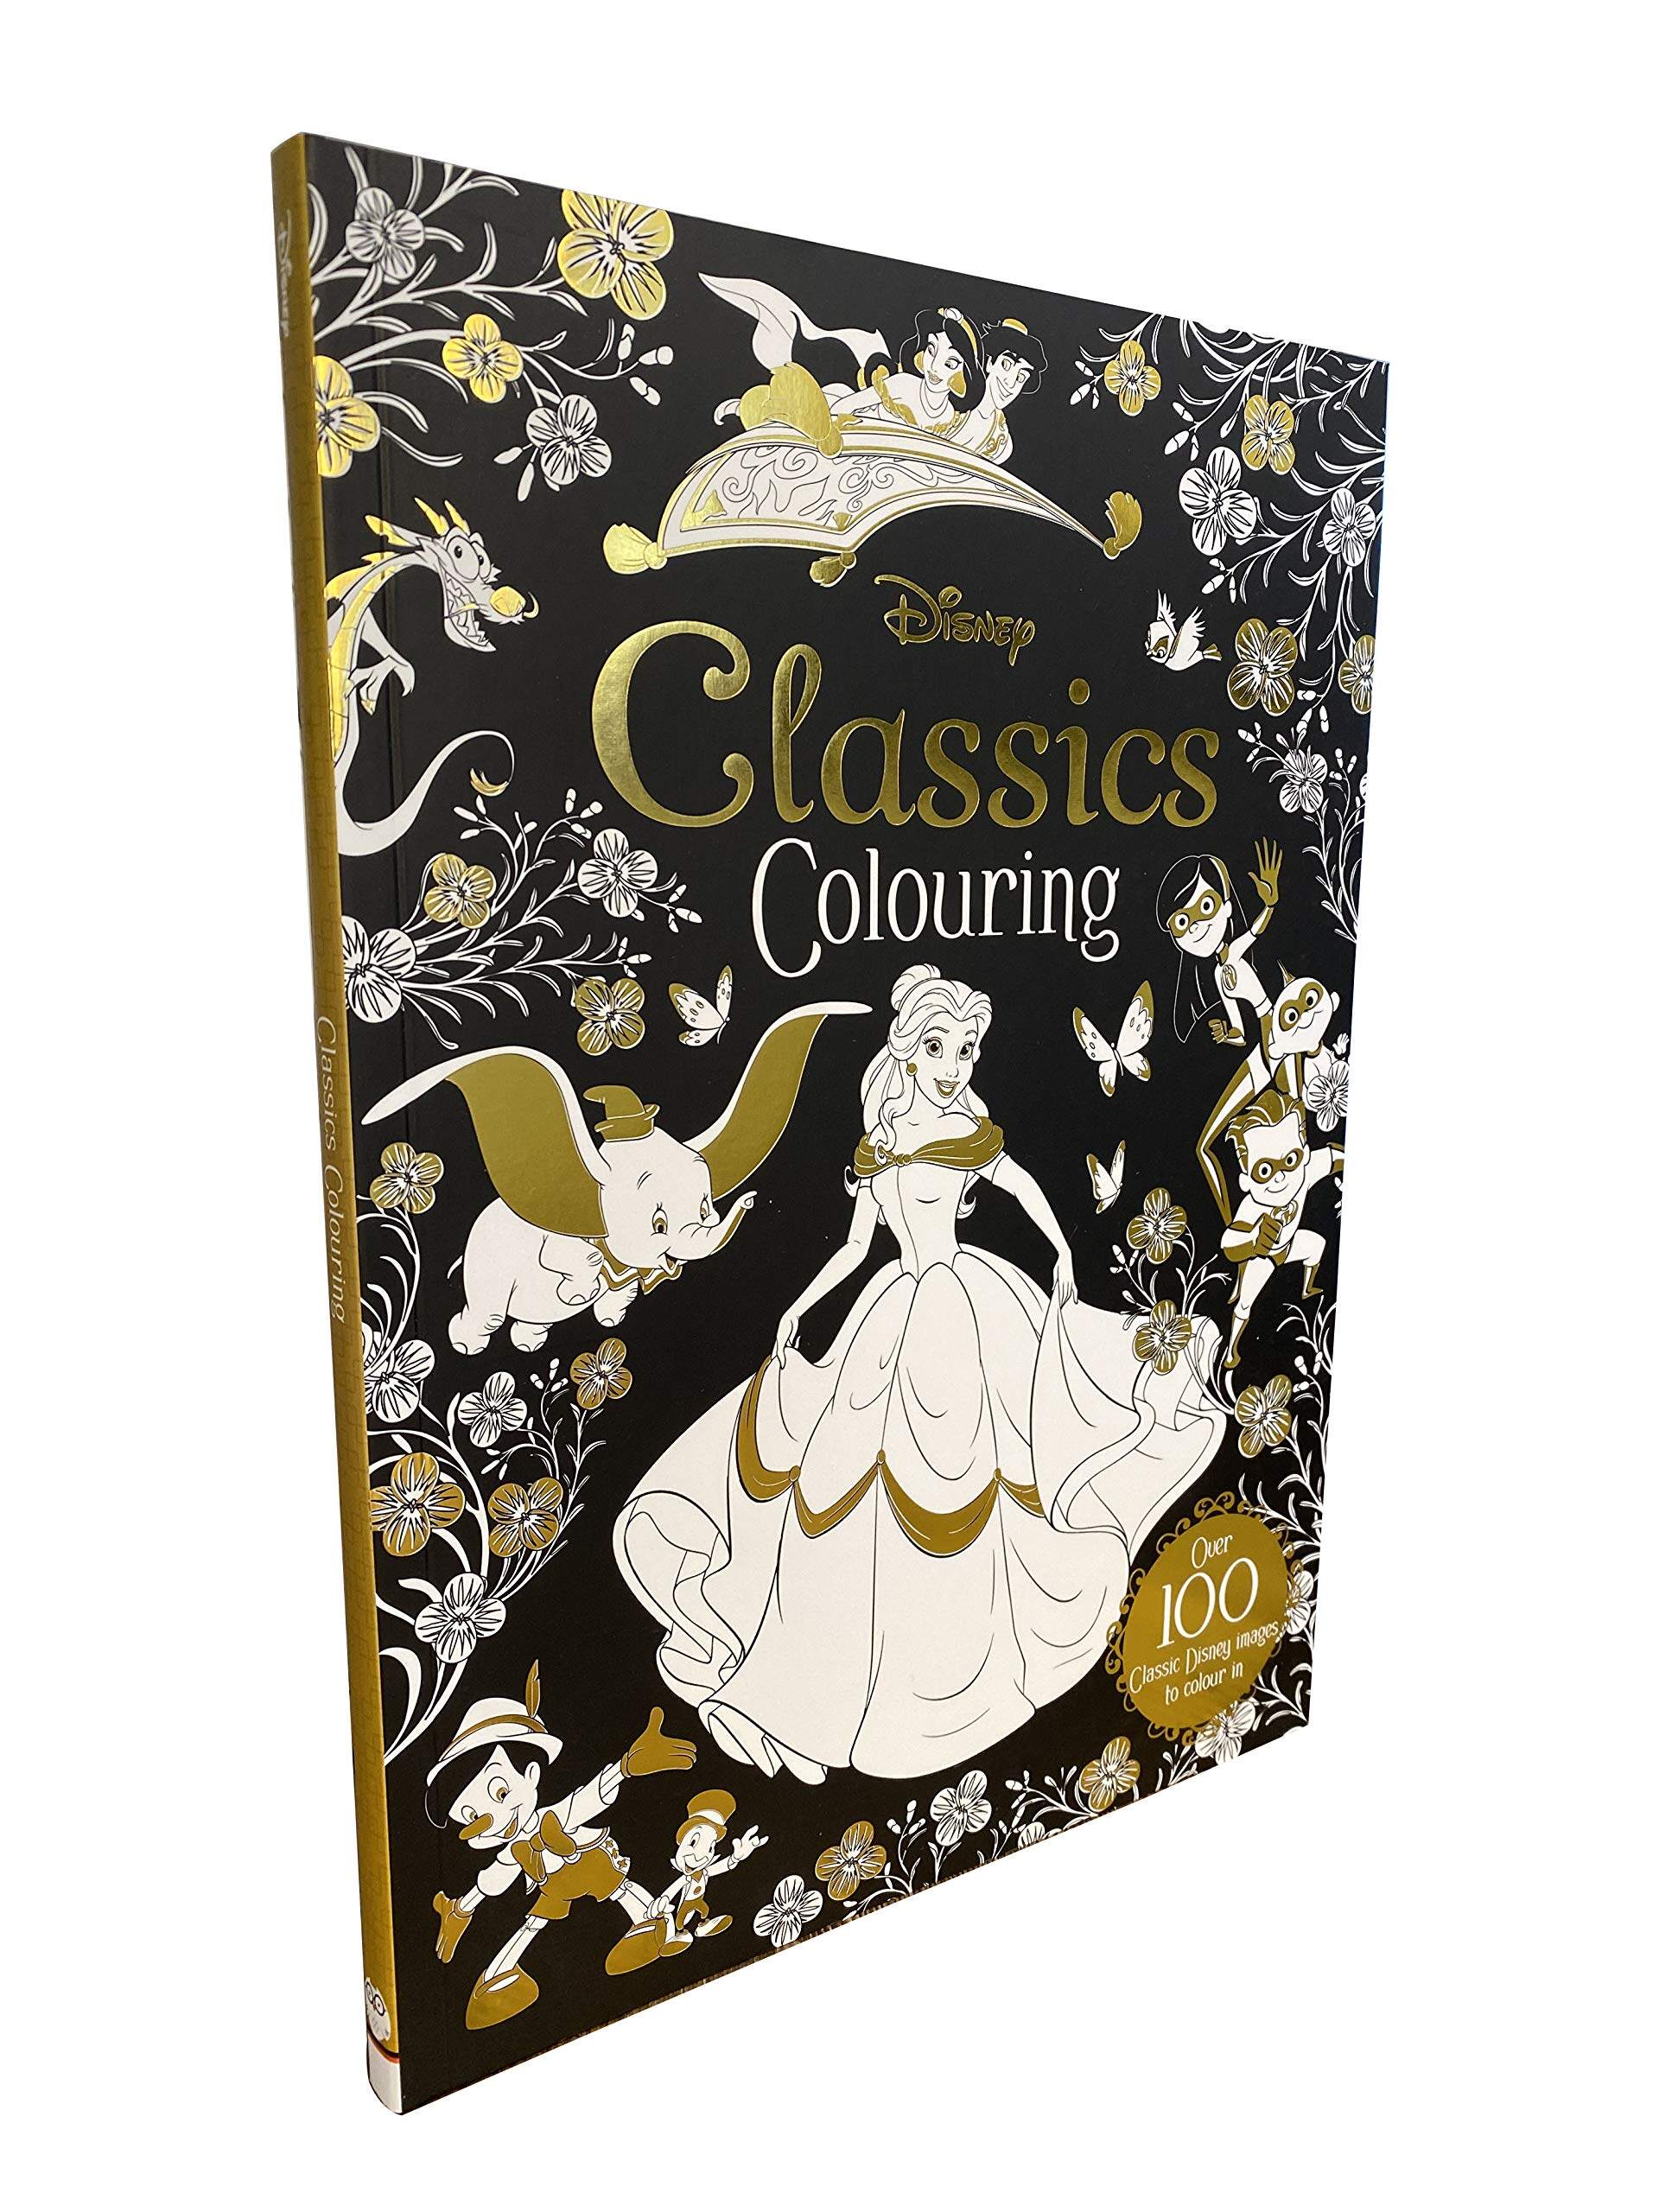 Disney Classics Young Adult Colouring Book with over 100 heart-warming  images to colour from classic Disney films